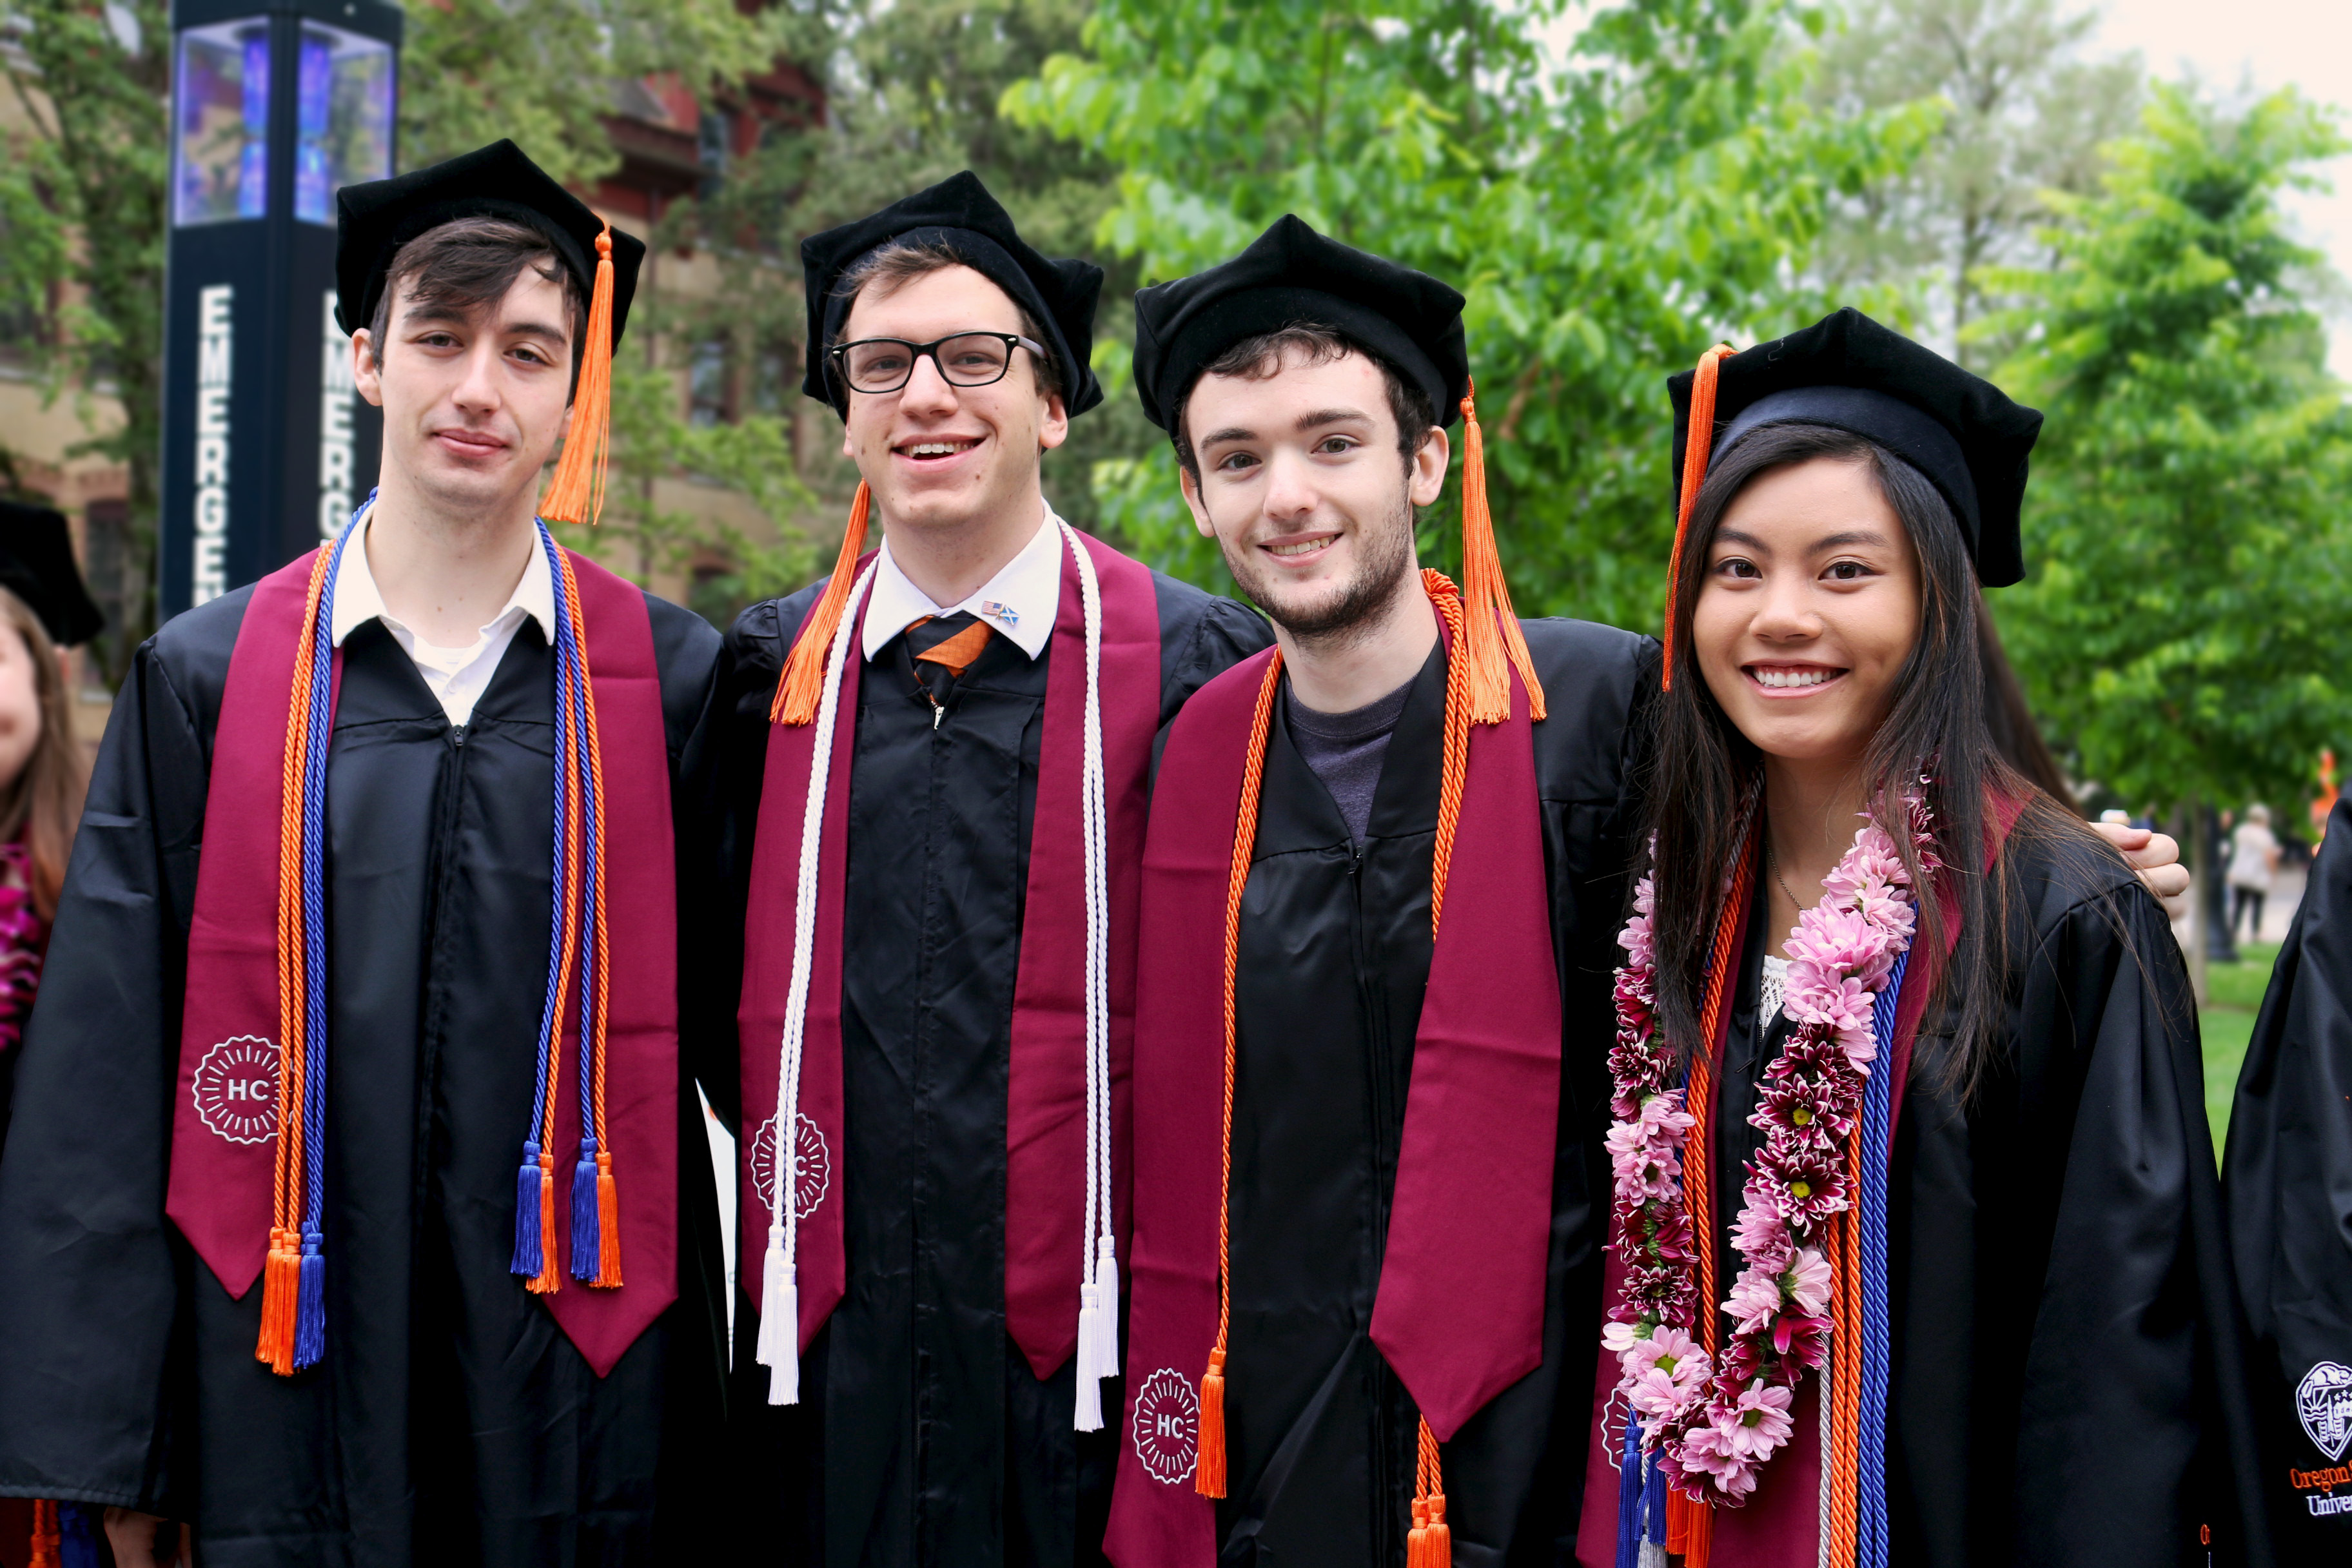 Honors College students wearing the graduation regalia